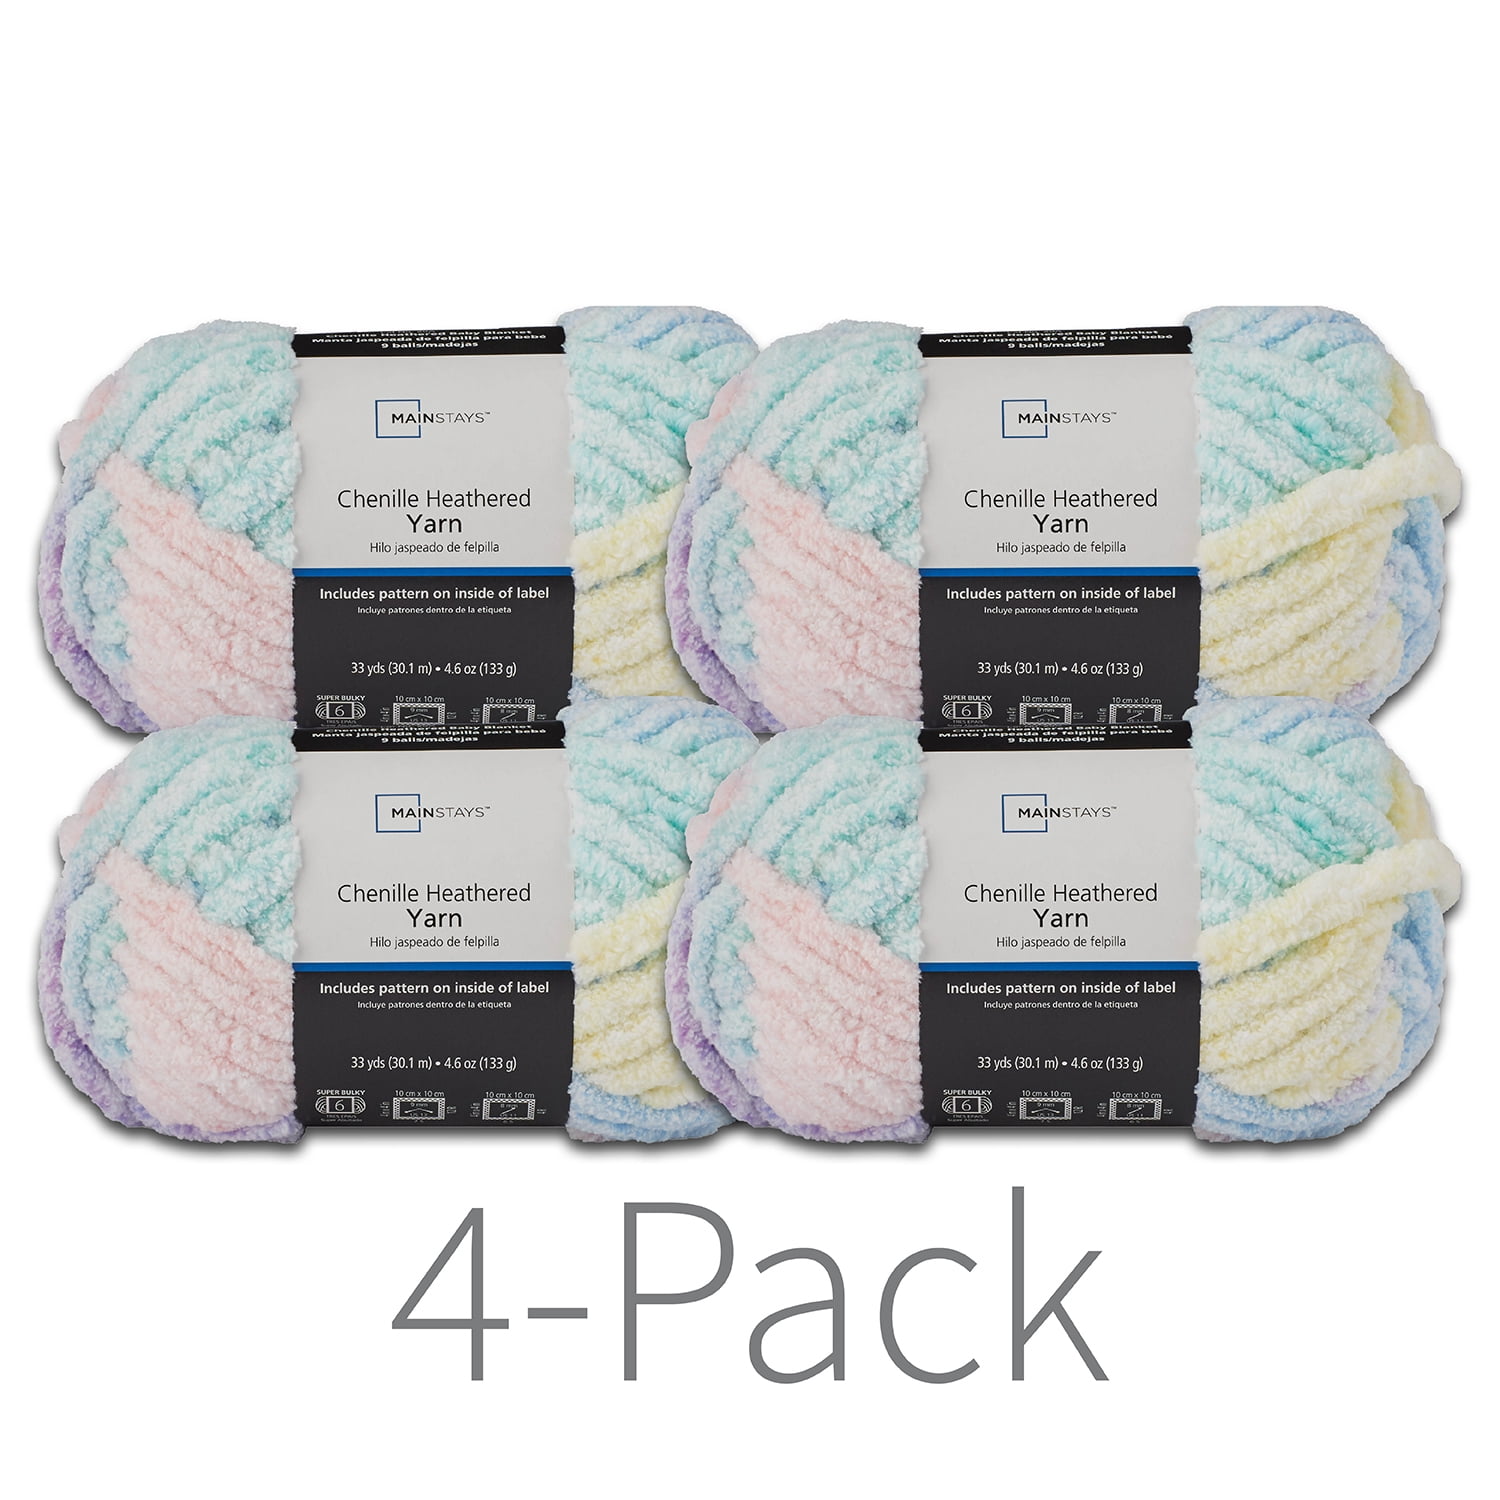 Mainstays Chenille Heathered Yarn, 33 yd, Multi Pastel, Super Bulky, Pack  of 4